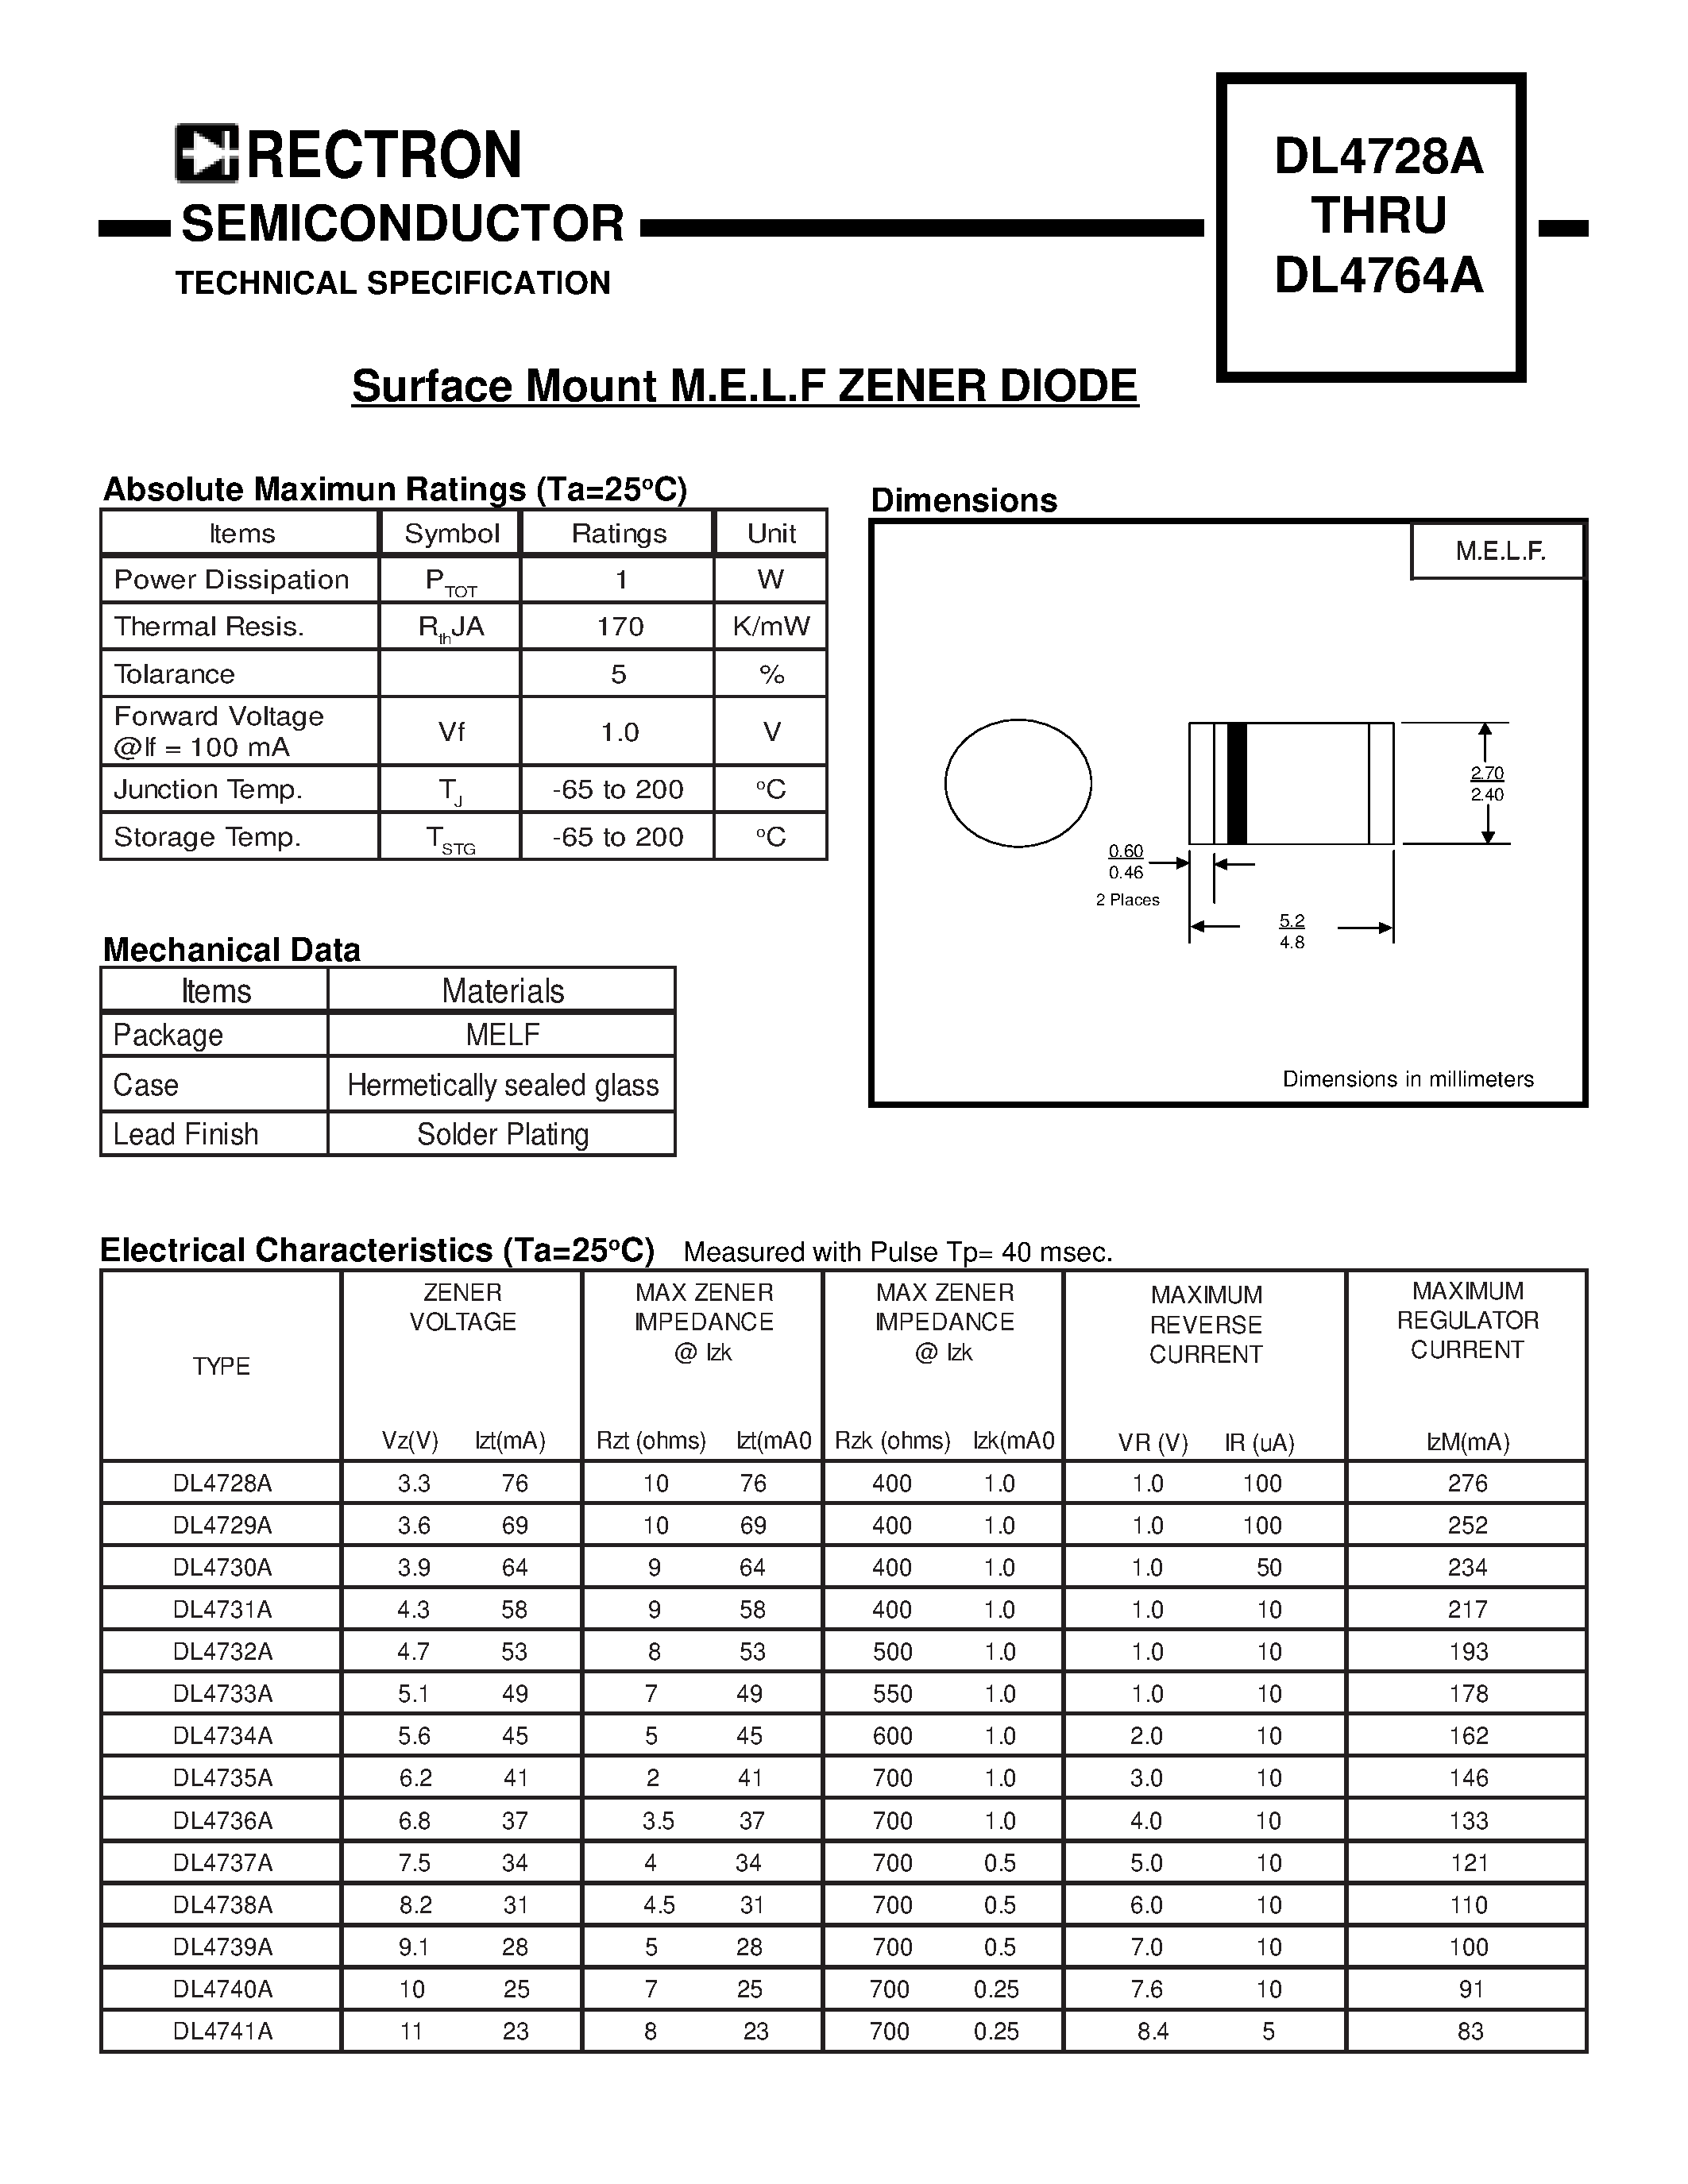 Datasheet DL4735A - Surface Mount M.E.L.F ZENER DIODE page 1